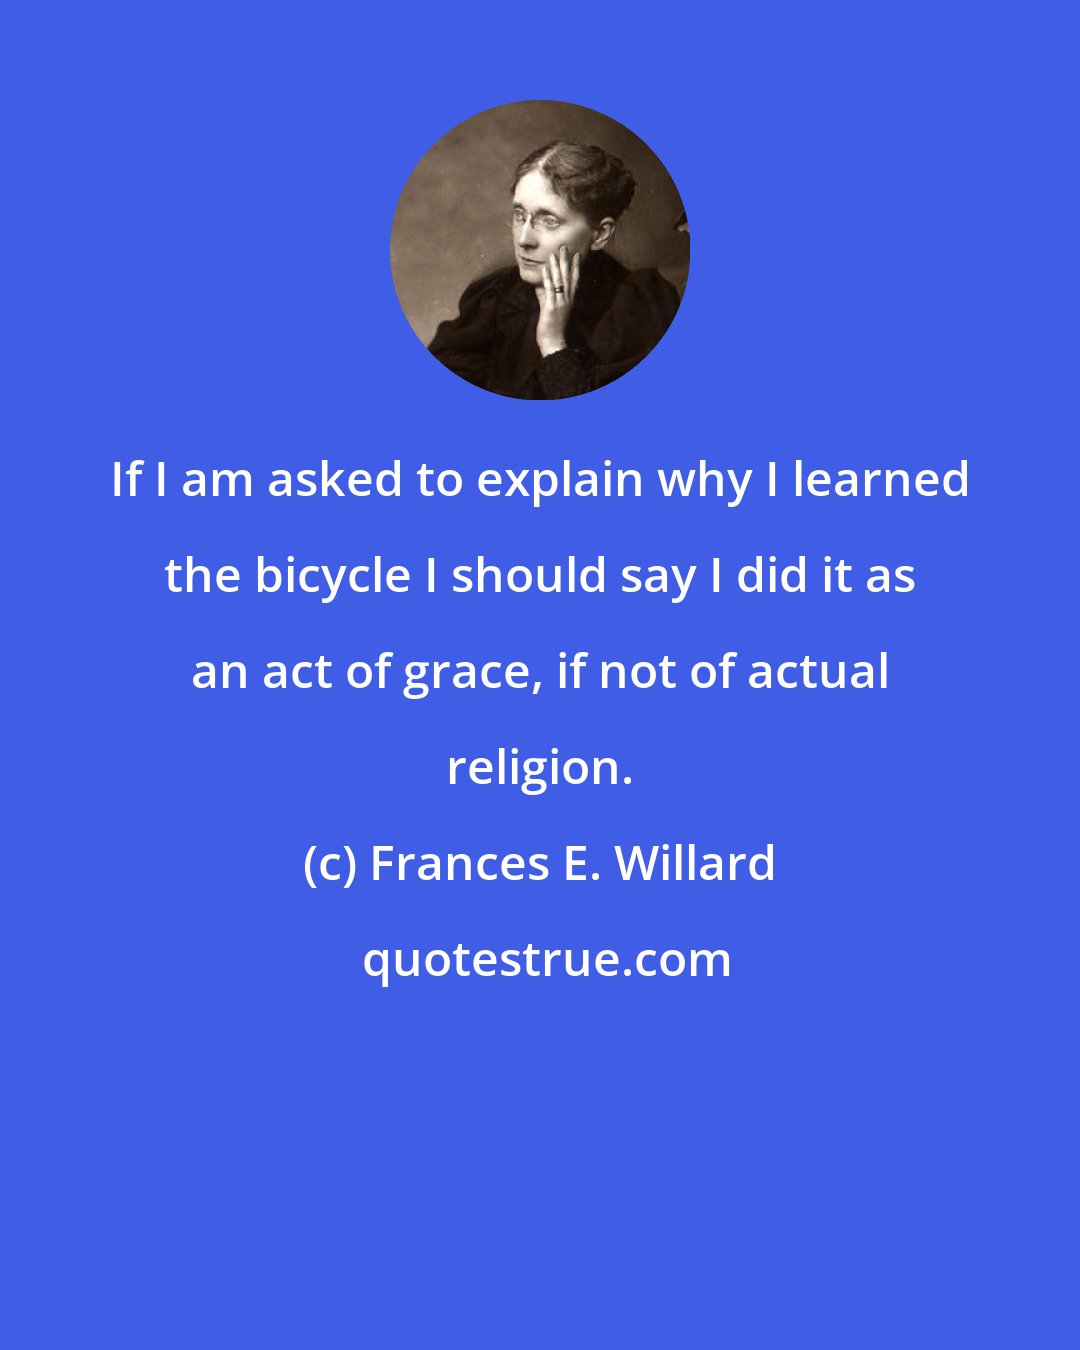 Frances E. Willard: If I am asked to explain why I learned the bicycle I should say I did it as an act of grace, if not of actual religion.